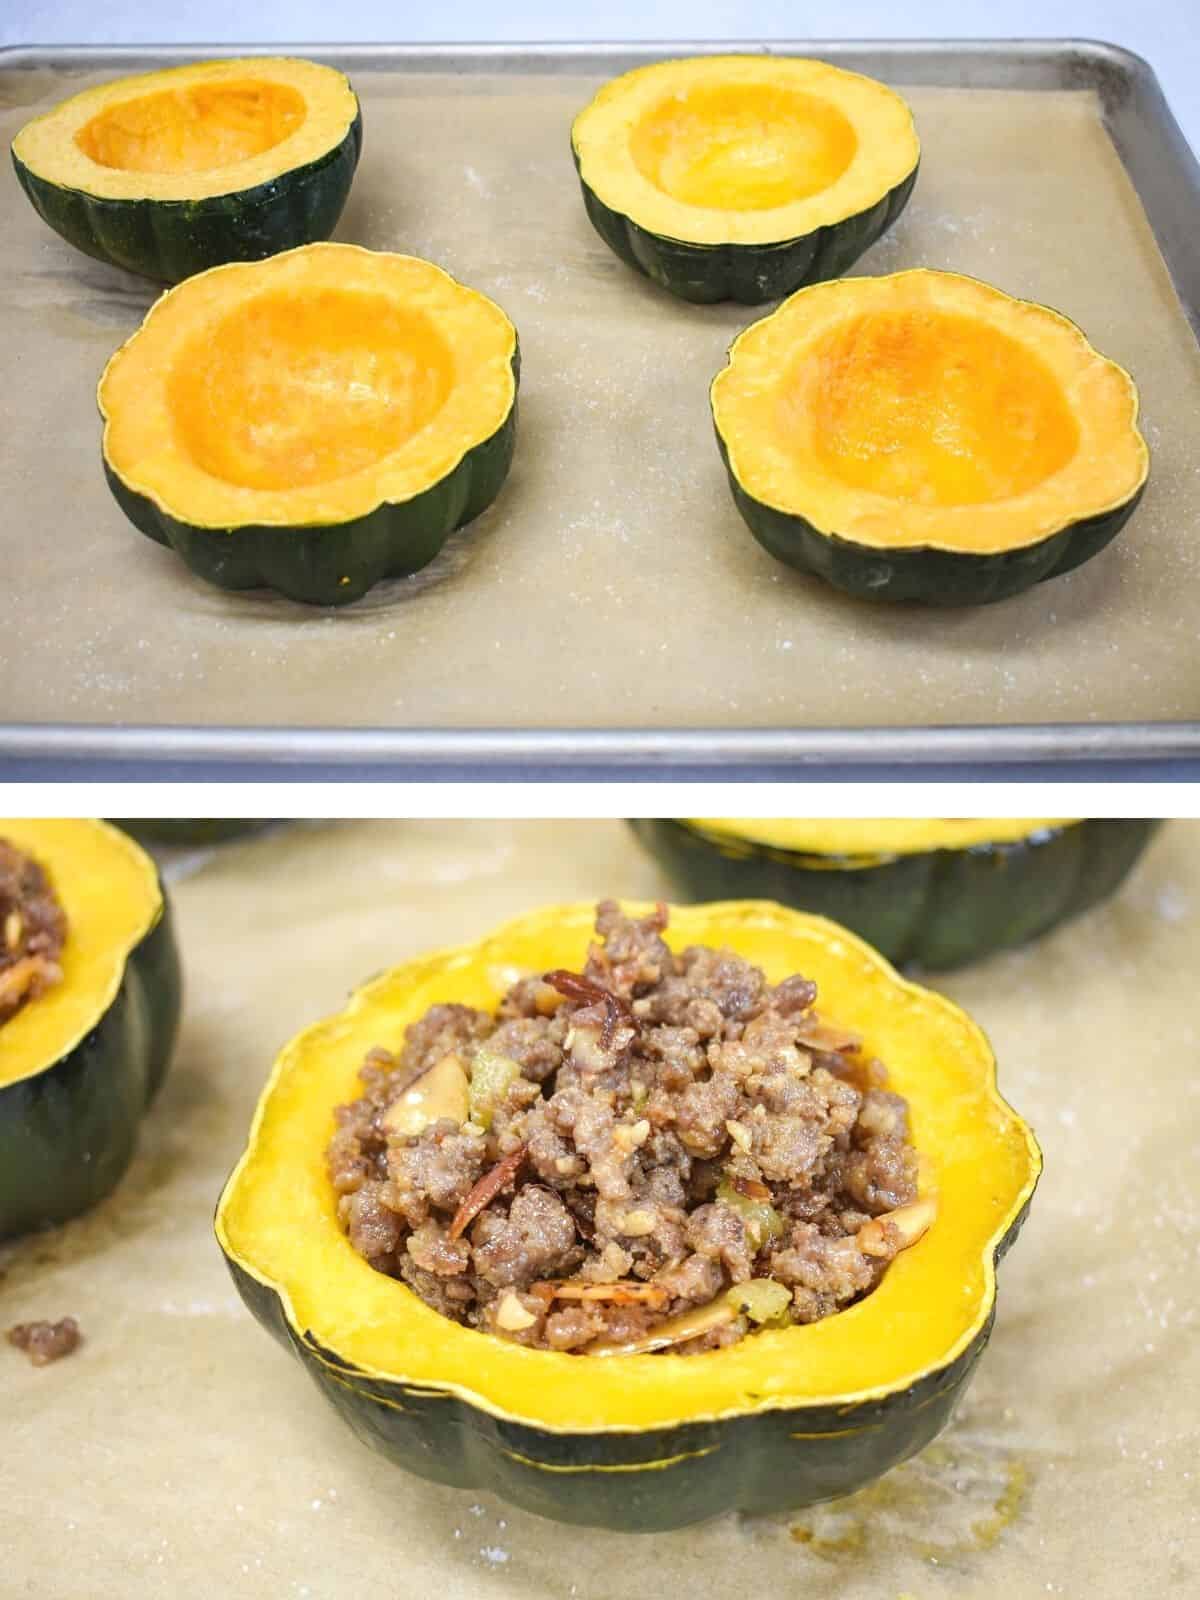 Two images of the acorn squash, the first the empty pre-roasted halves and the second is stuffed with the sausage.